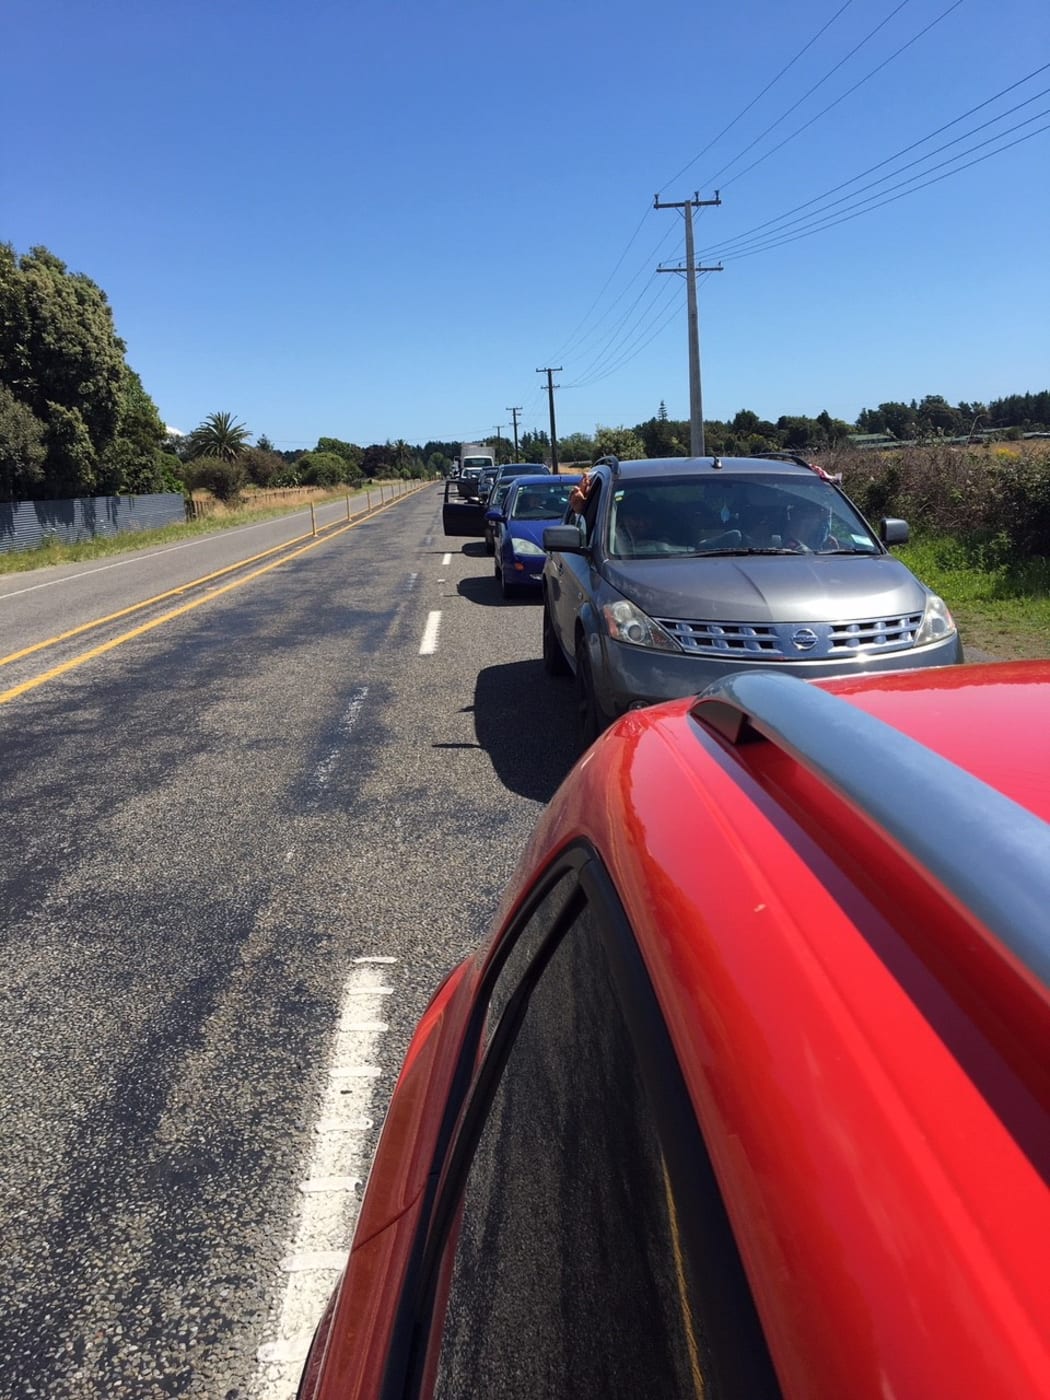 RNZ producer Melanie Phipps was stuck in a long queue of traffic for a couple of hours while attempting to drive north to Taupō.